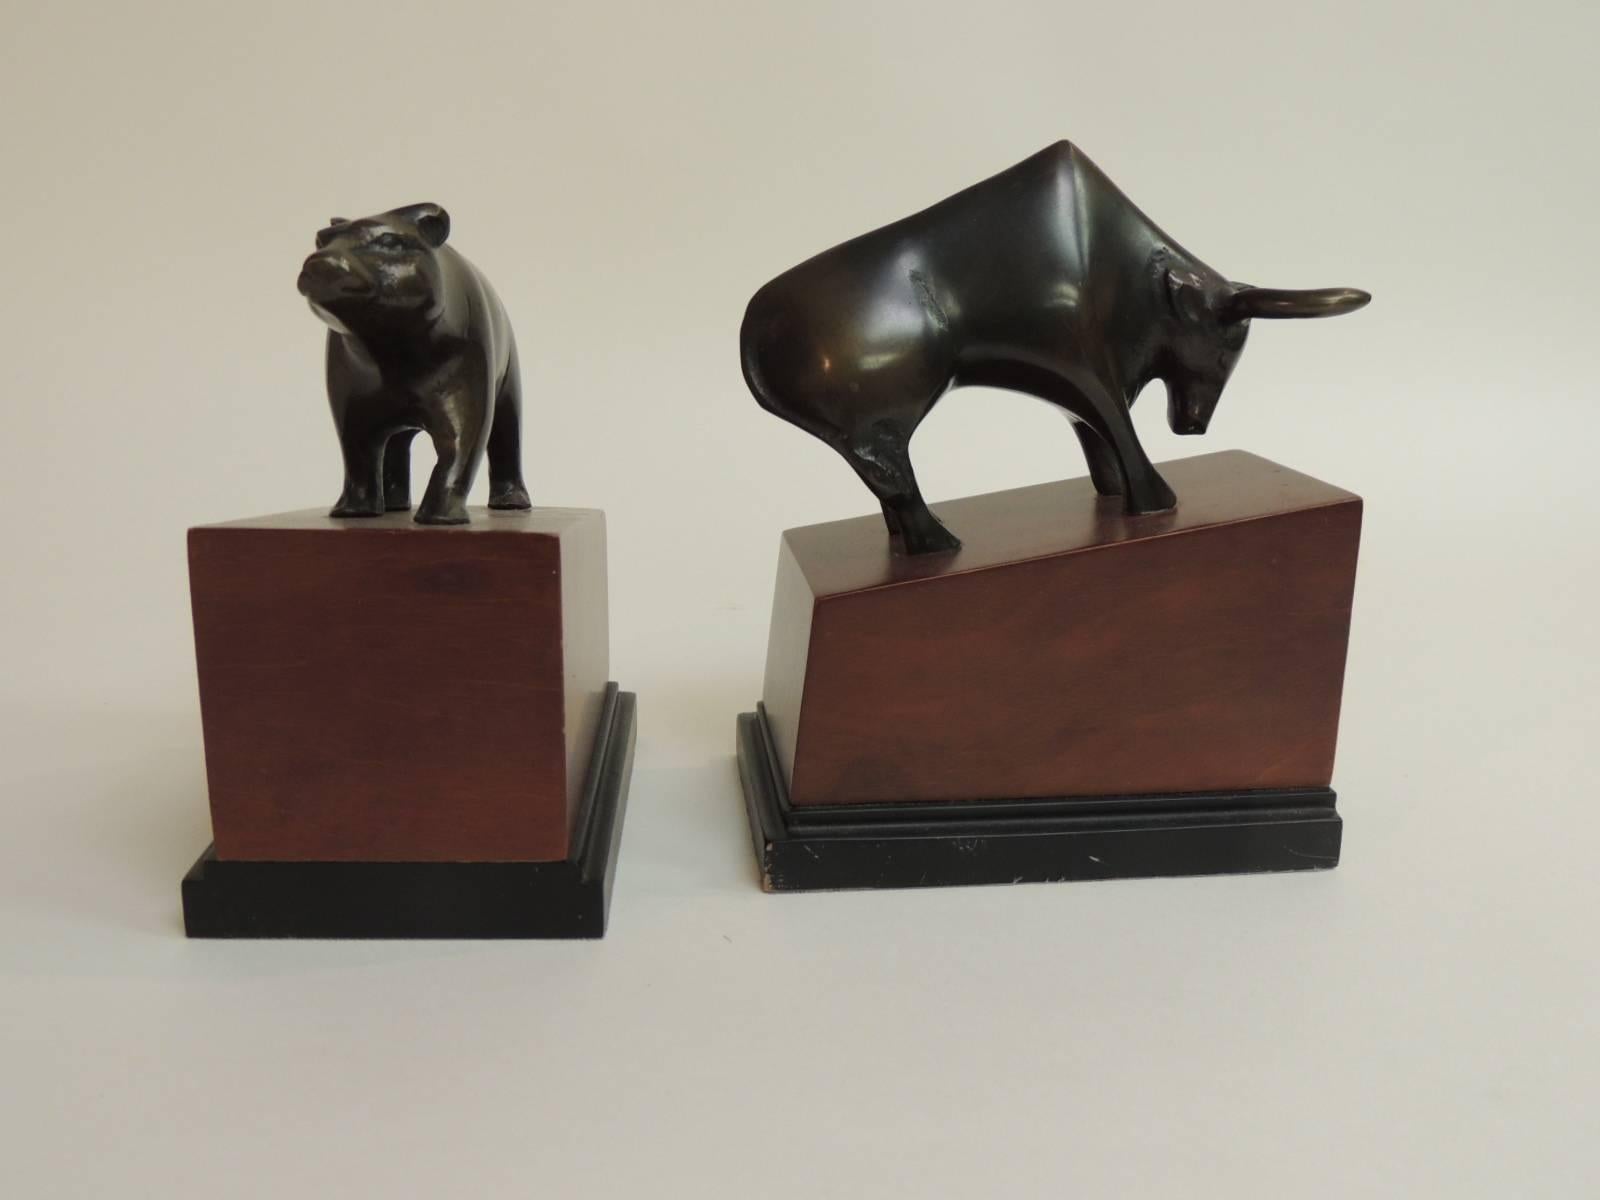 Italian Pair of Vintage Bull and Bear Bookends Crafted in Bronze-Mounted on Wood Bases